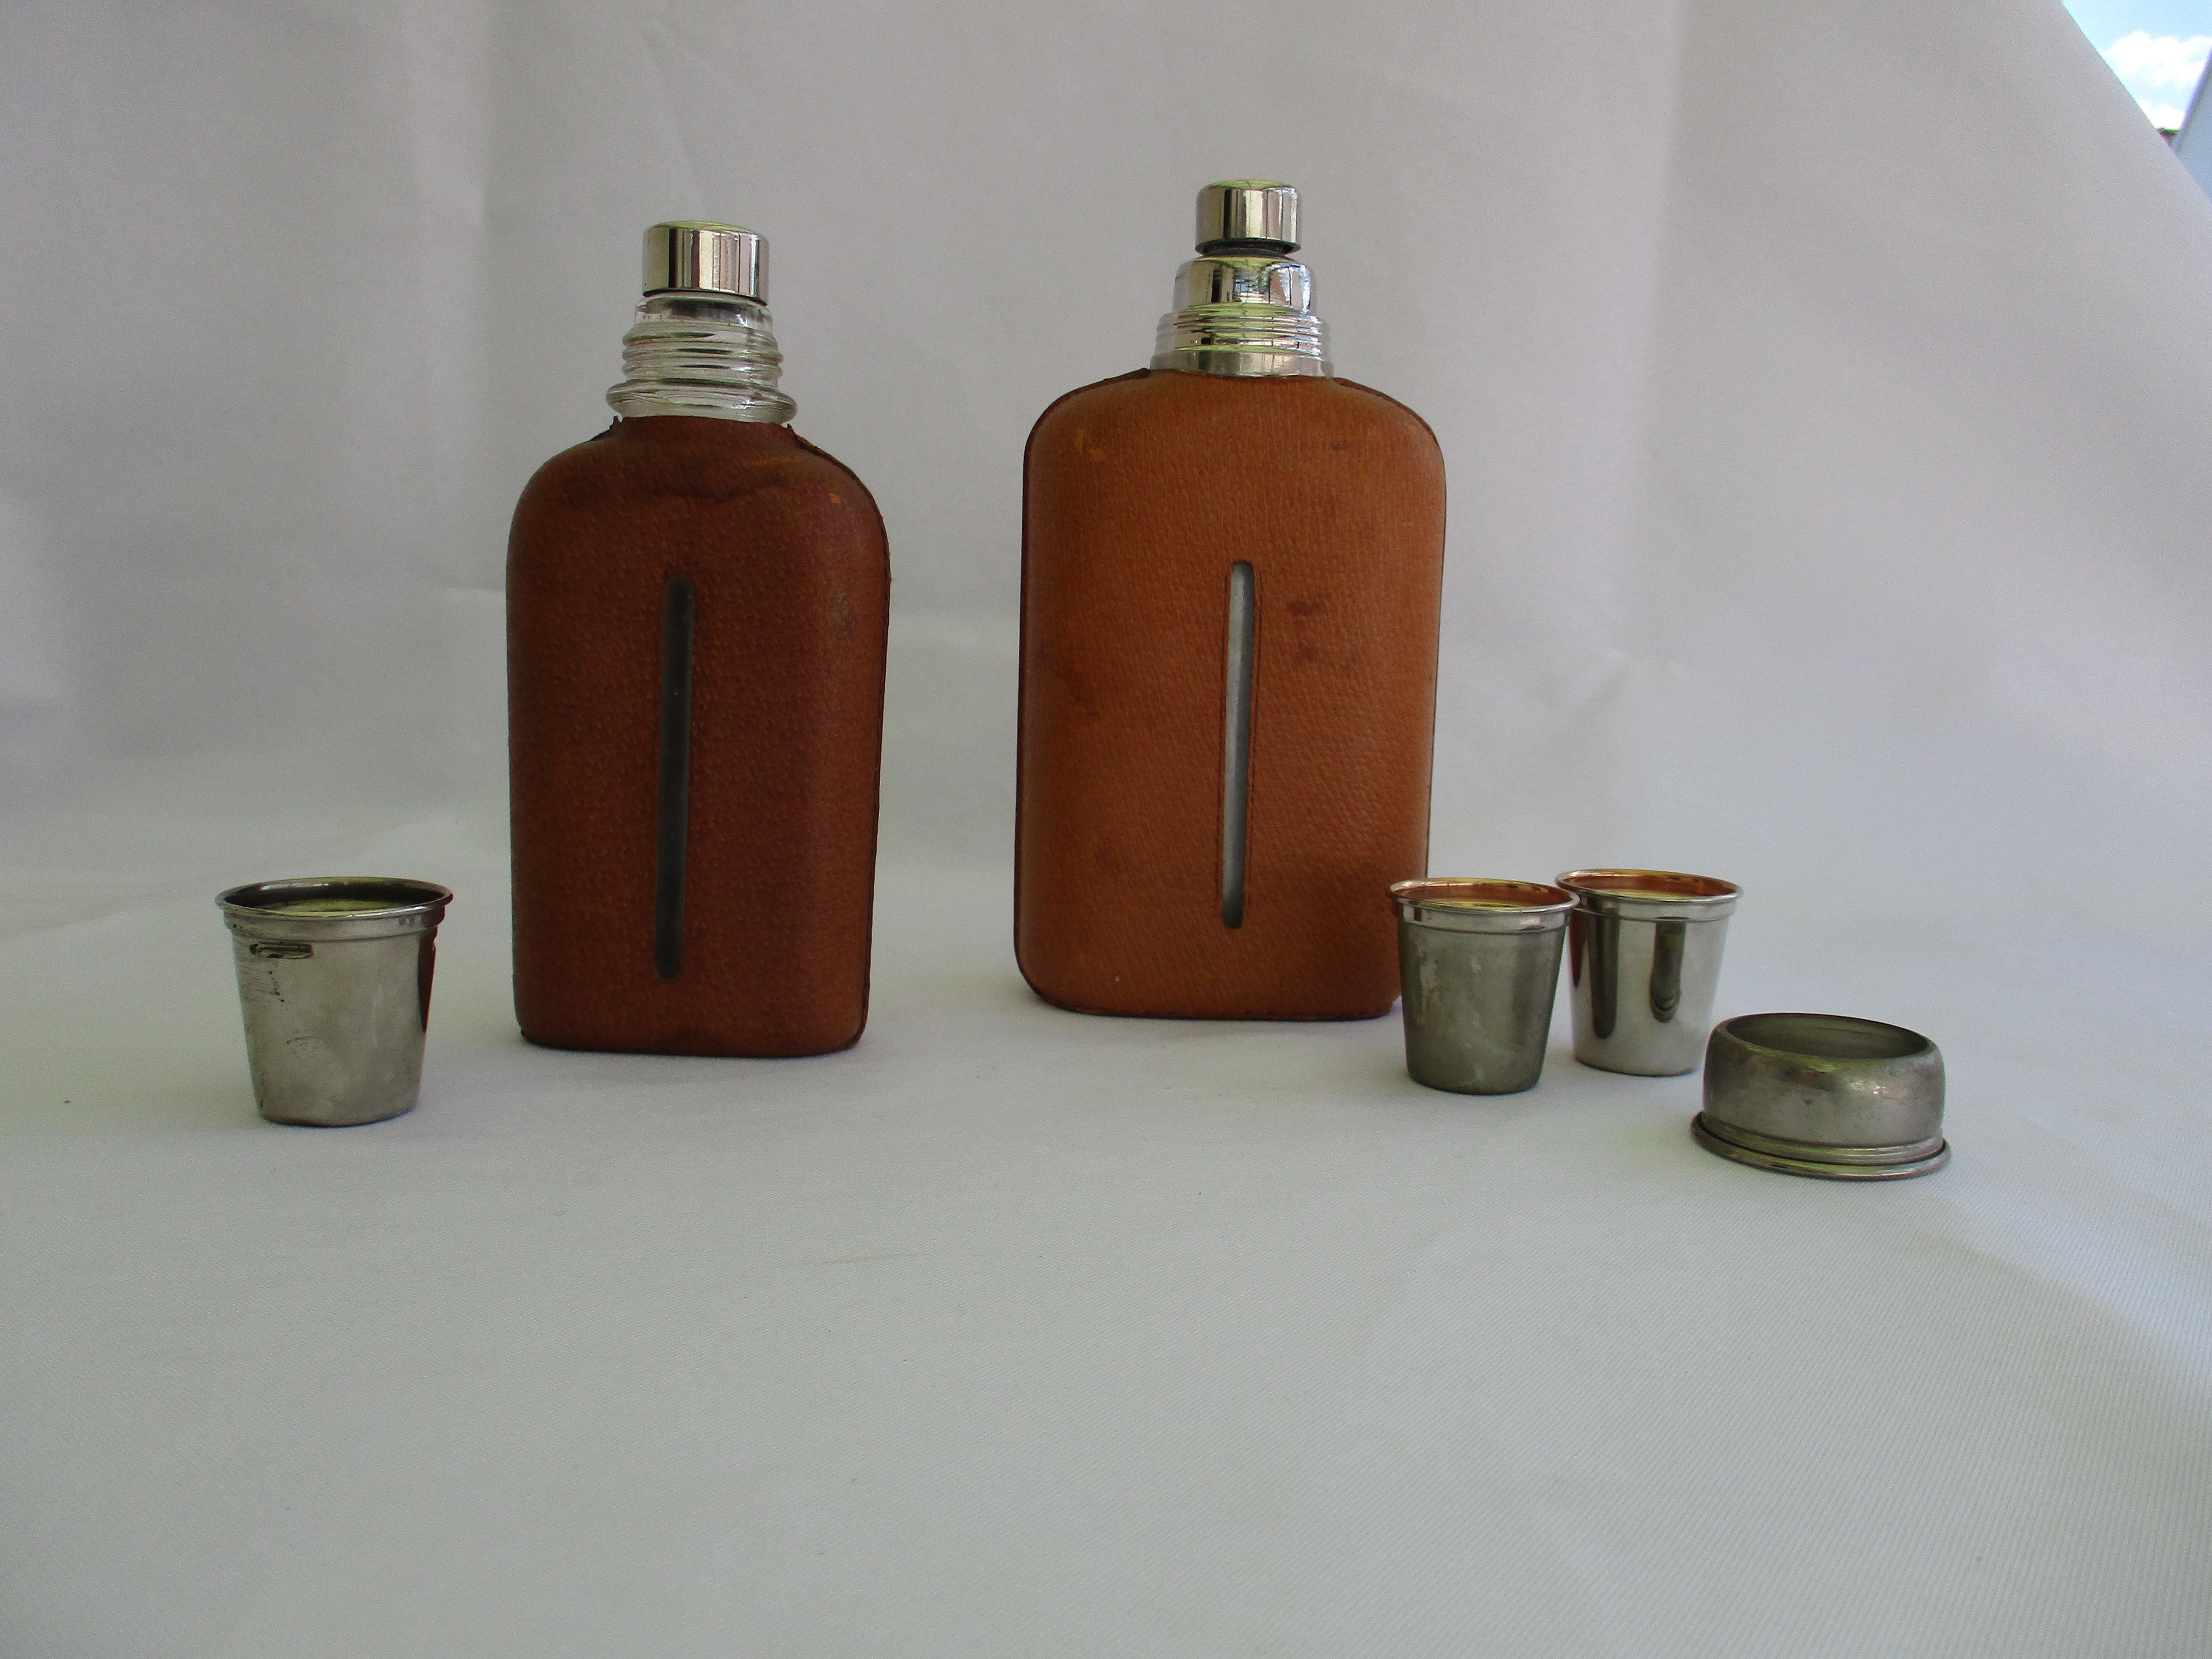 Made in Vienna by Carl Aubock II. 2 Sculptural Vintage Flasks, sold as a lot. The biger bottle comes with two shot glases into the Screw cap and the smaller one come with one shot glas. Both made from chrome-plated brass.
Some oxidation to surface,